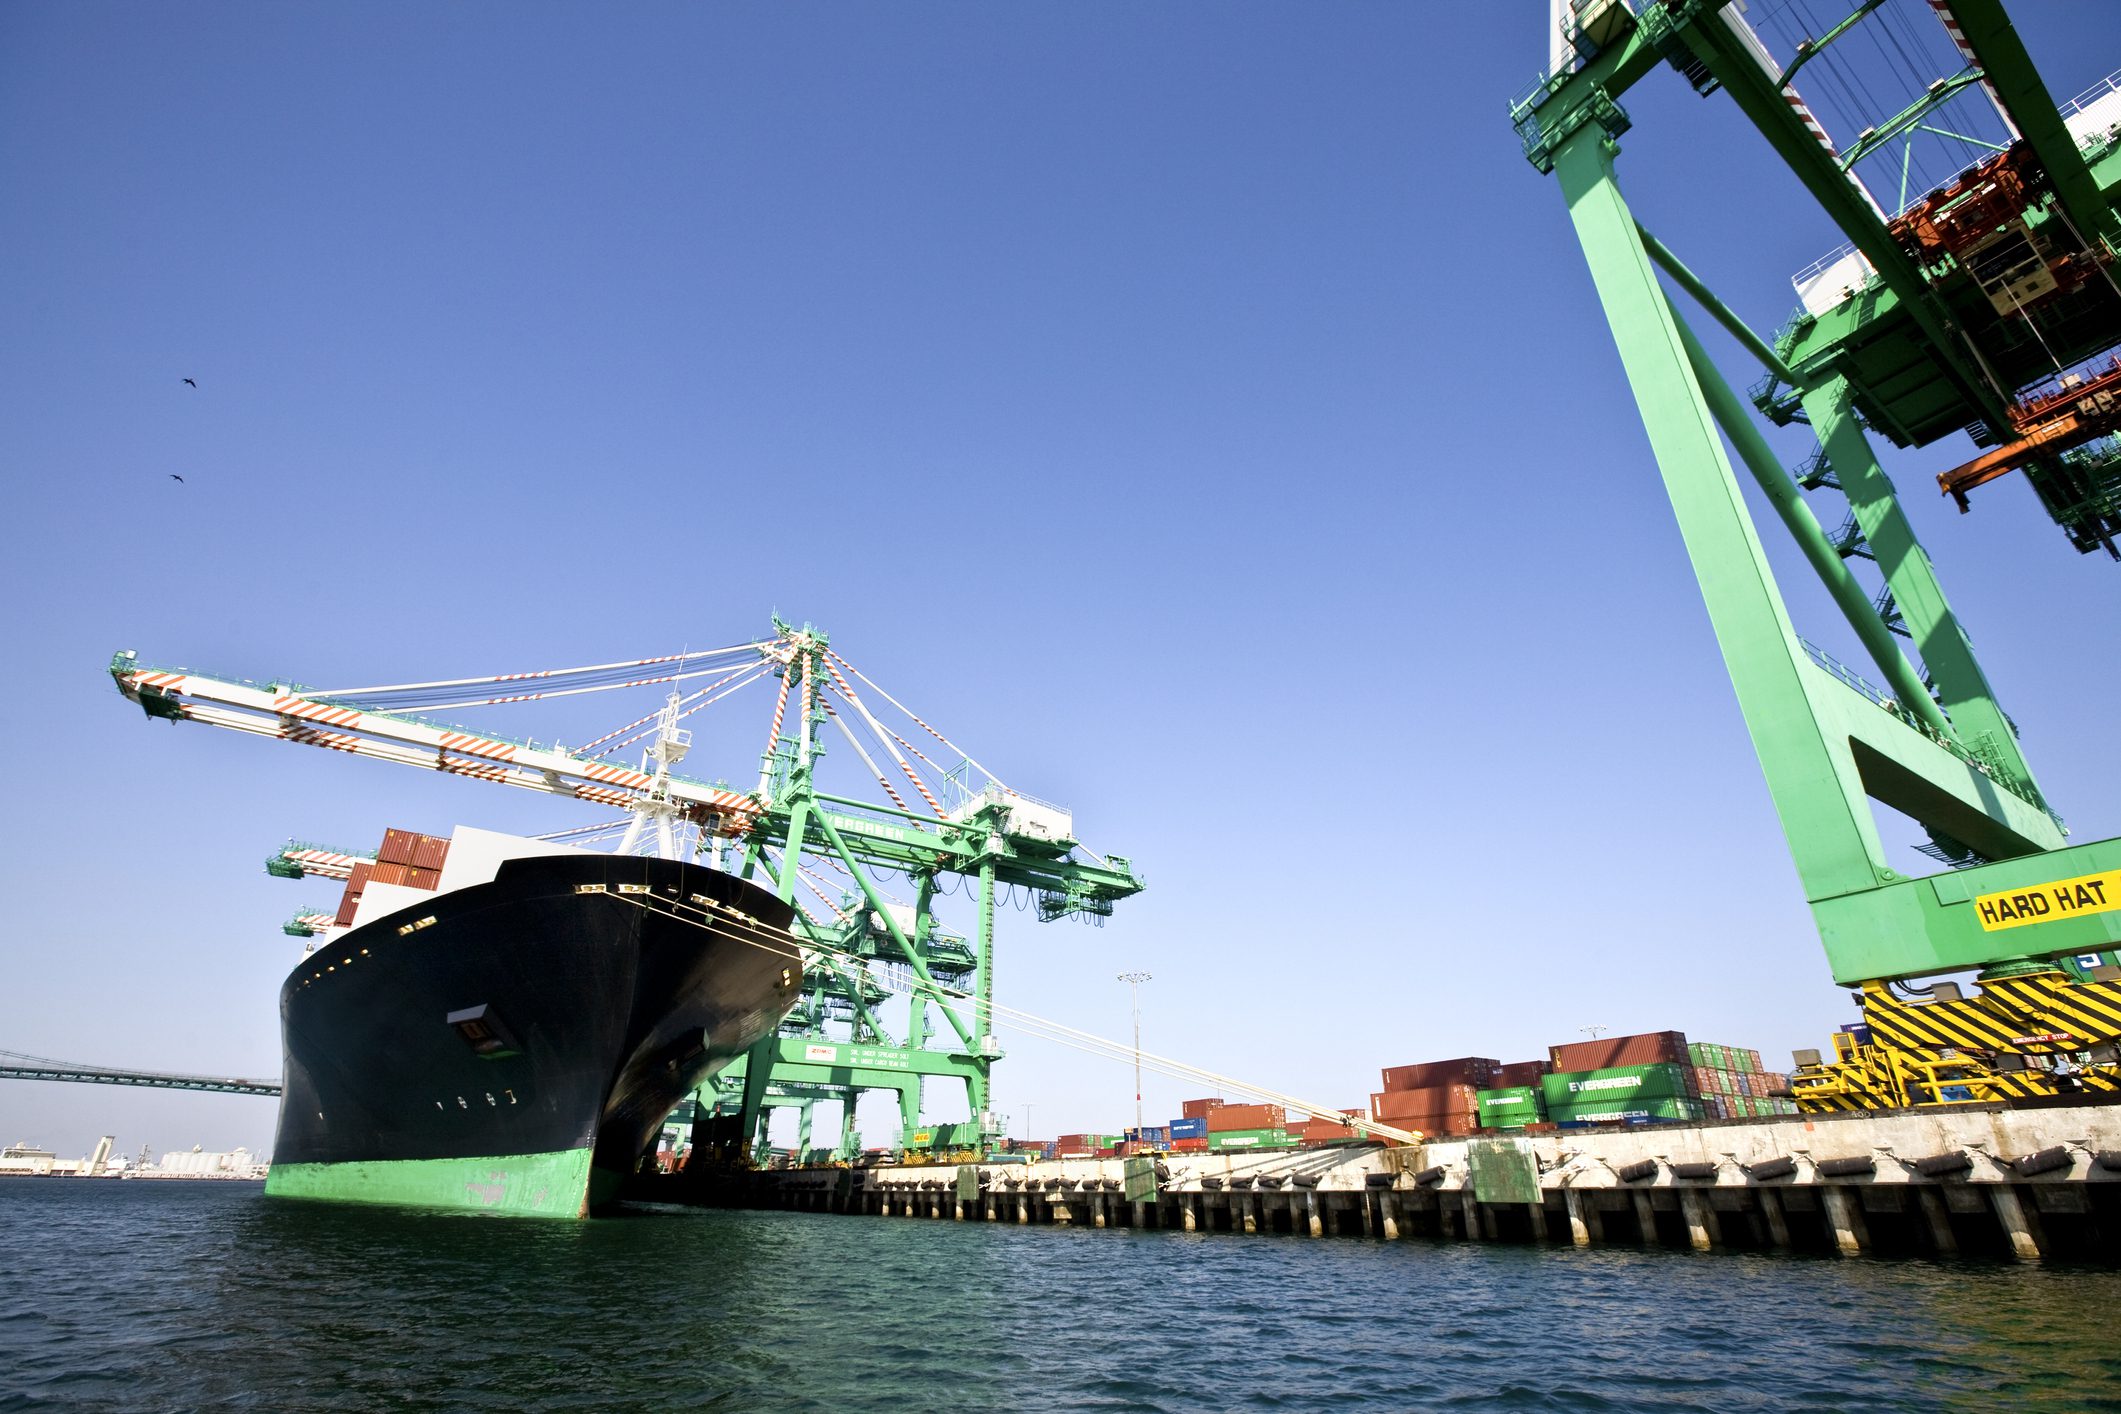 Steadfast Commitment: West Coast Ports Post Labor Deal Inked